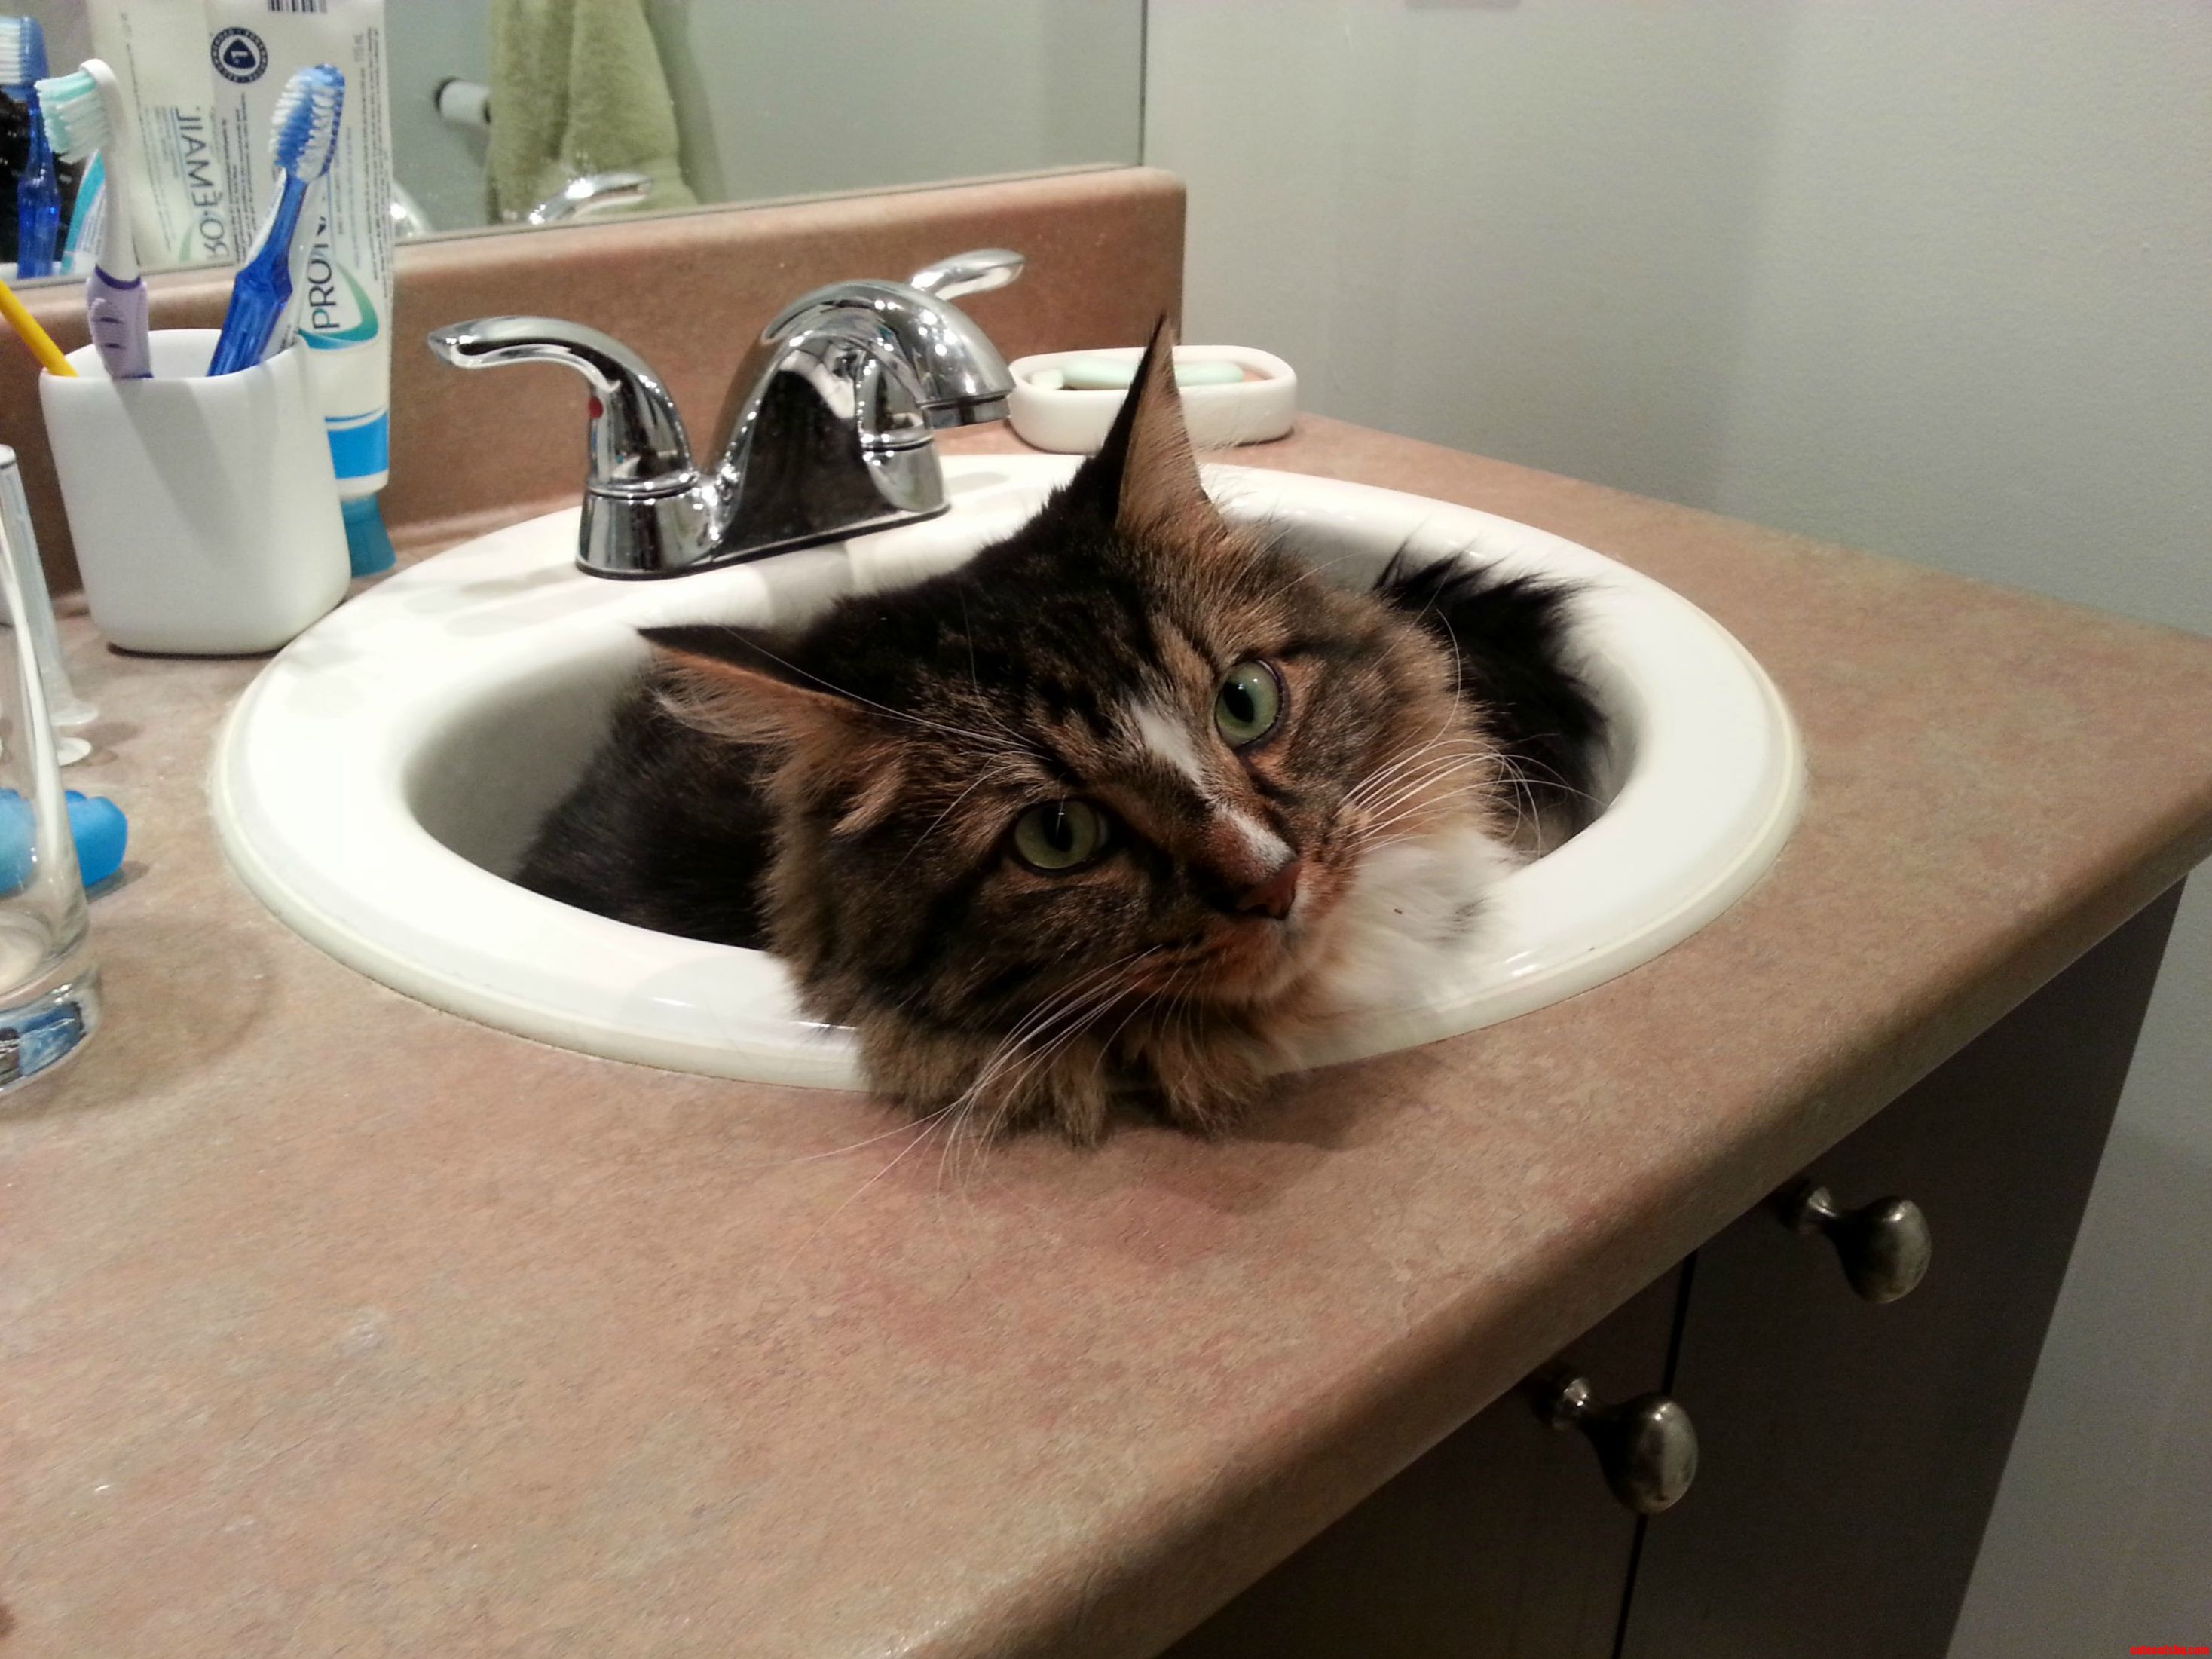 Was about to brush my teeth but cat was in sink